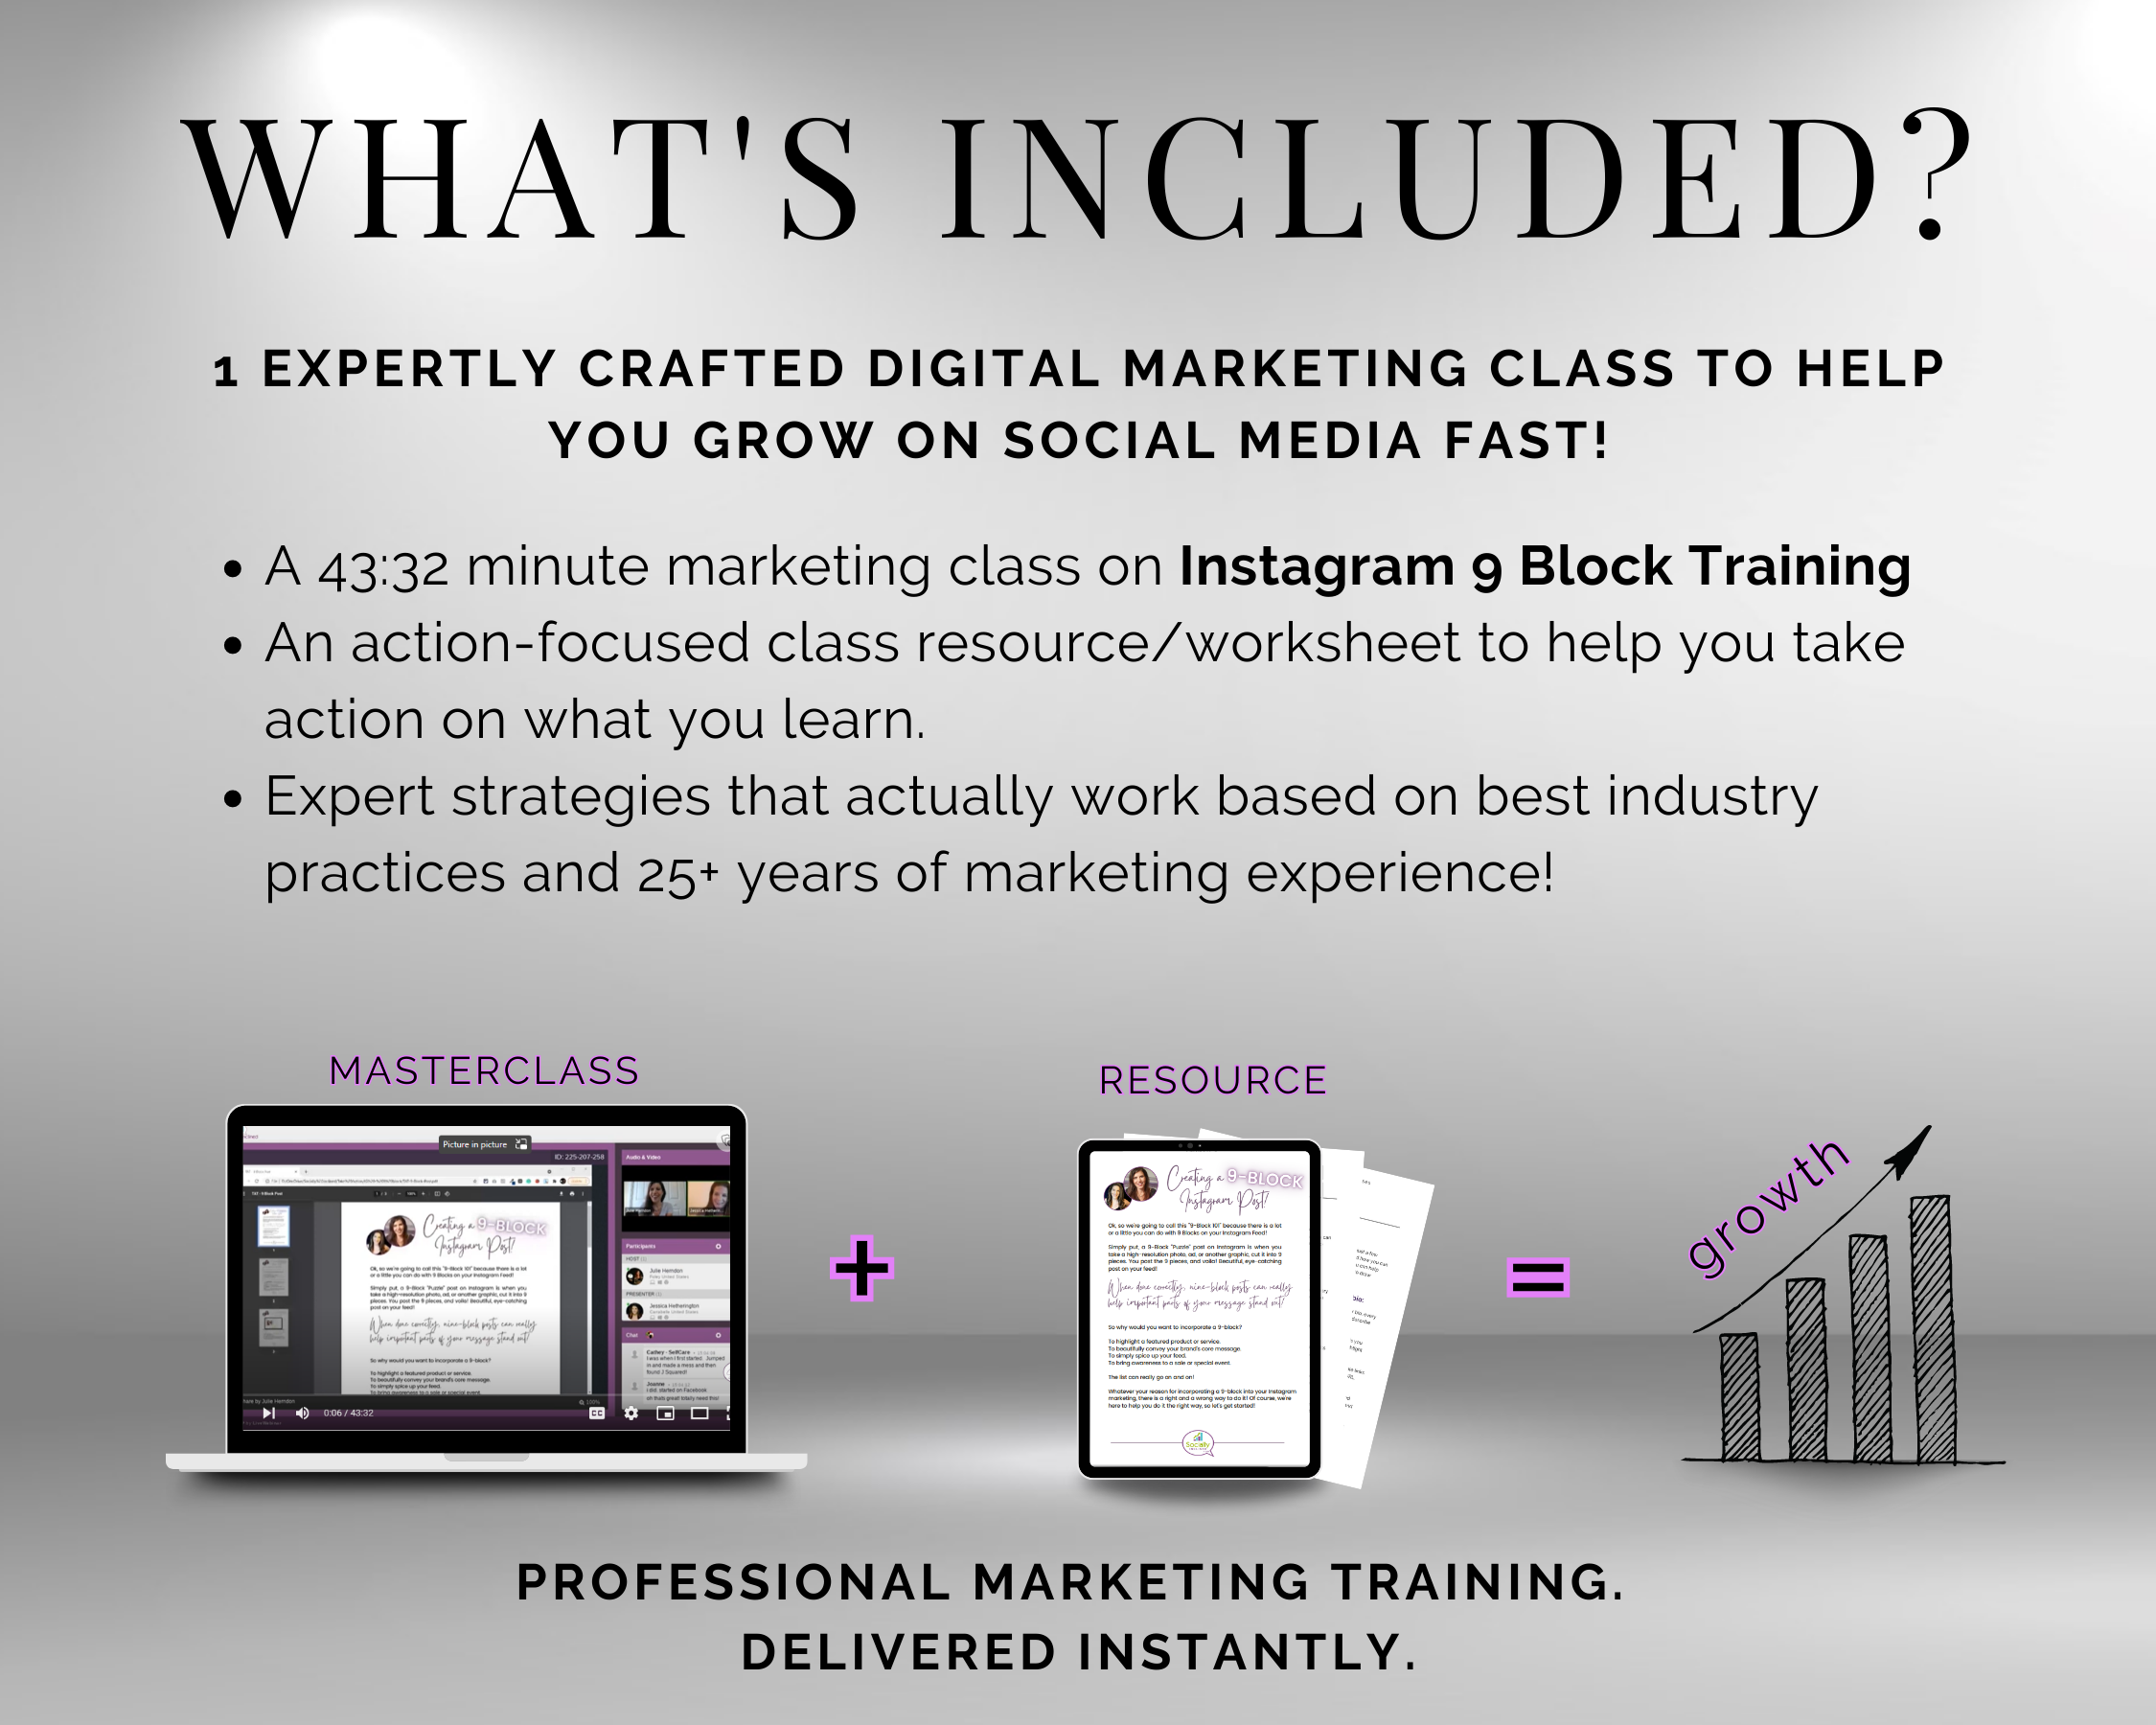 What's included in the TAT - Instagram 9 Block Training Masterclass by Get Socially Inclined? Please provide the product description so that I can find the important SEO keywords for you.